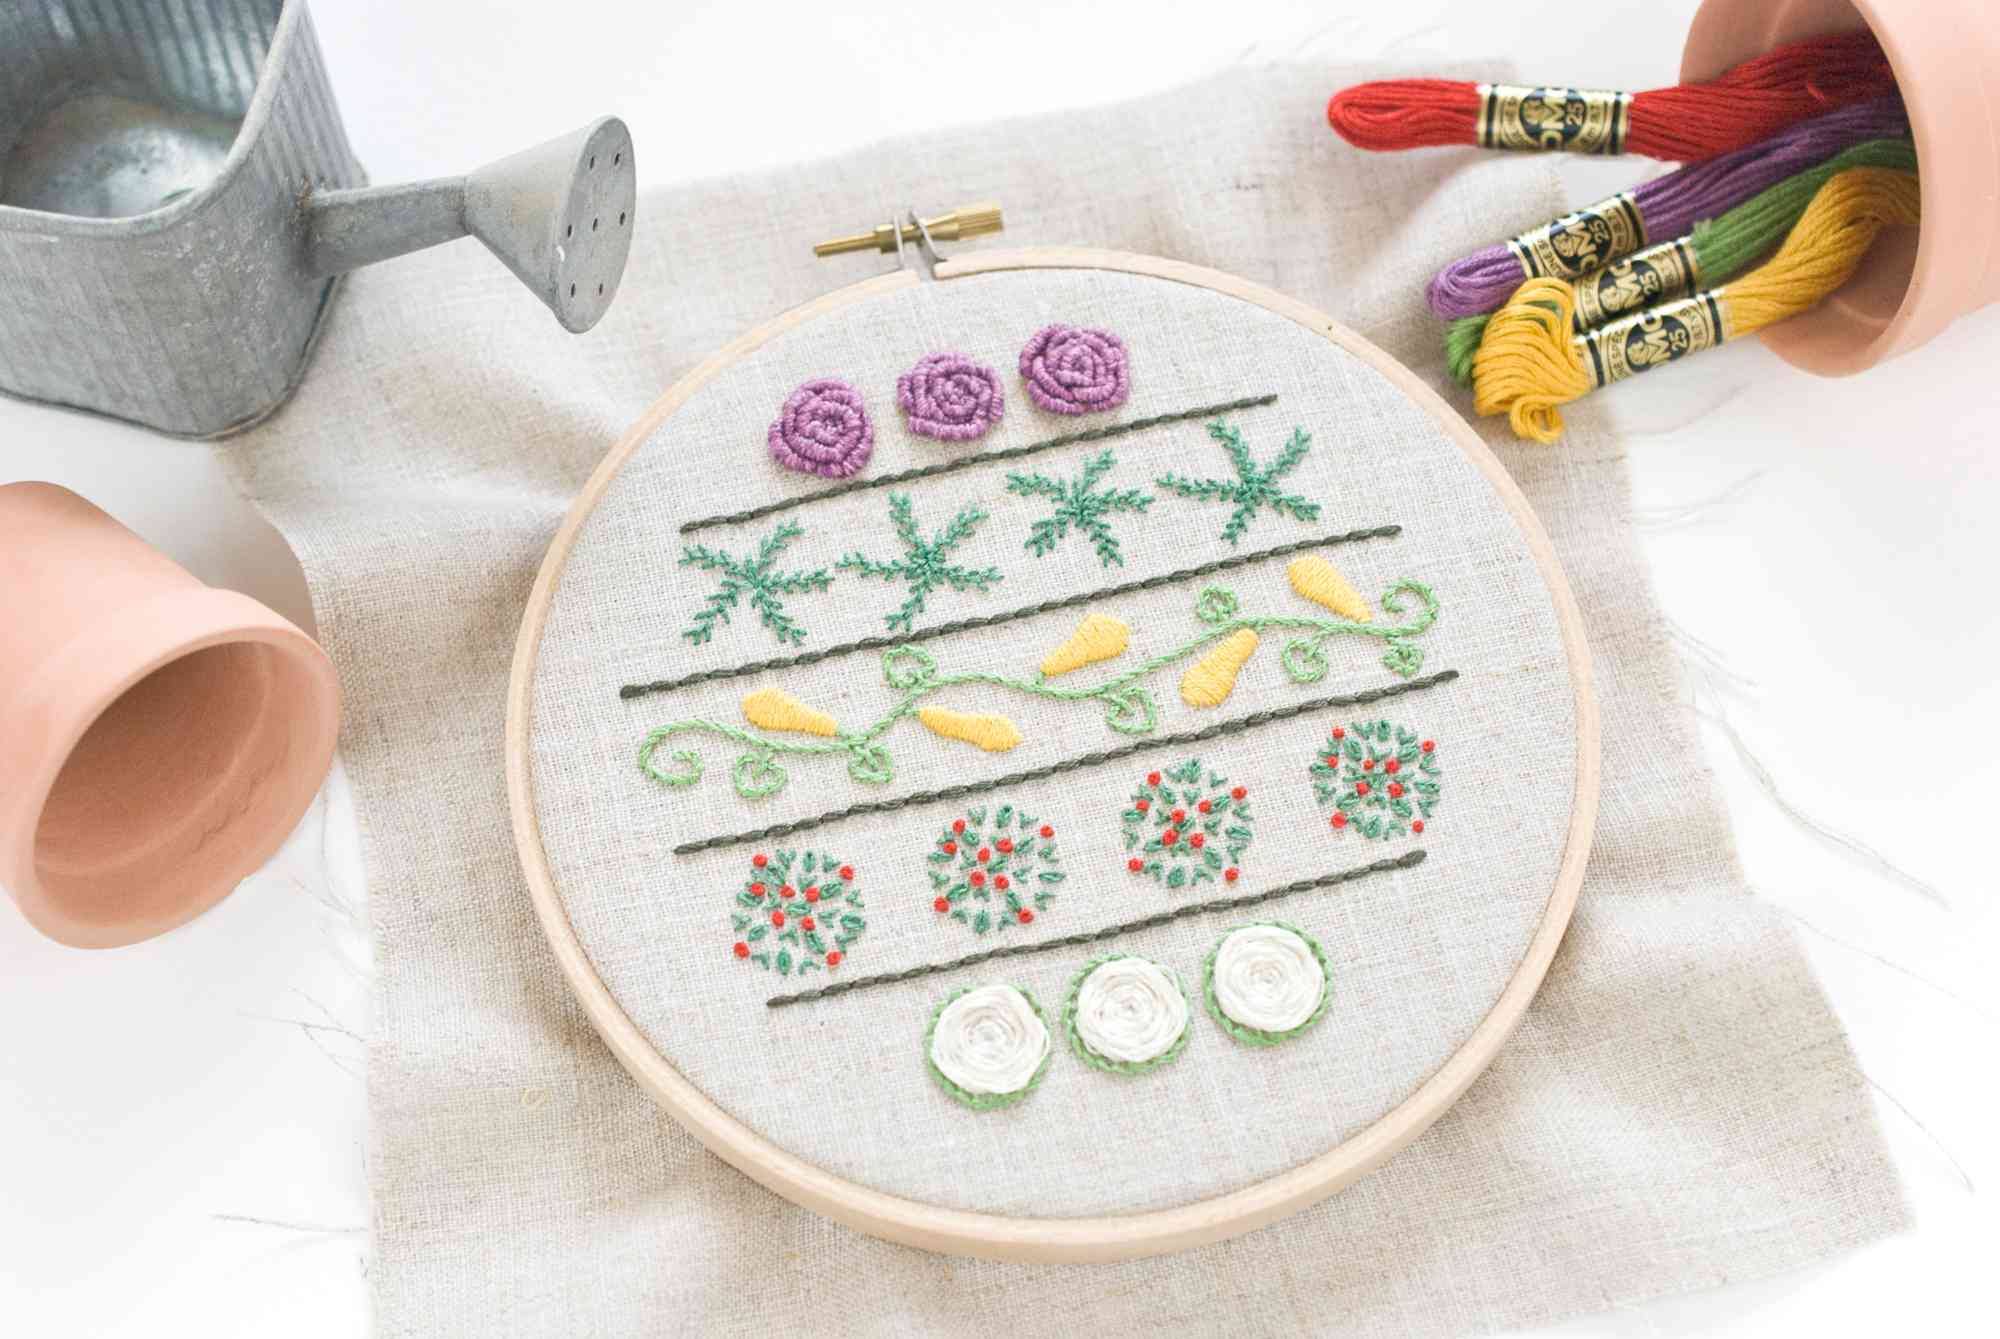 French Embroidery Patterns Our Top 25 Free Embroidery Designs